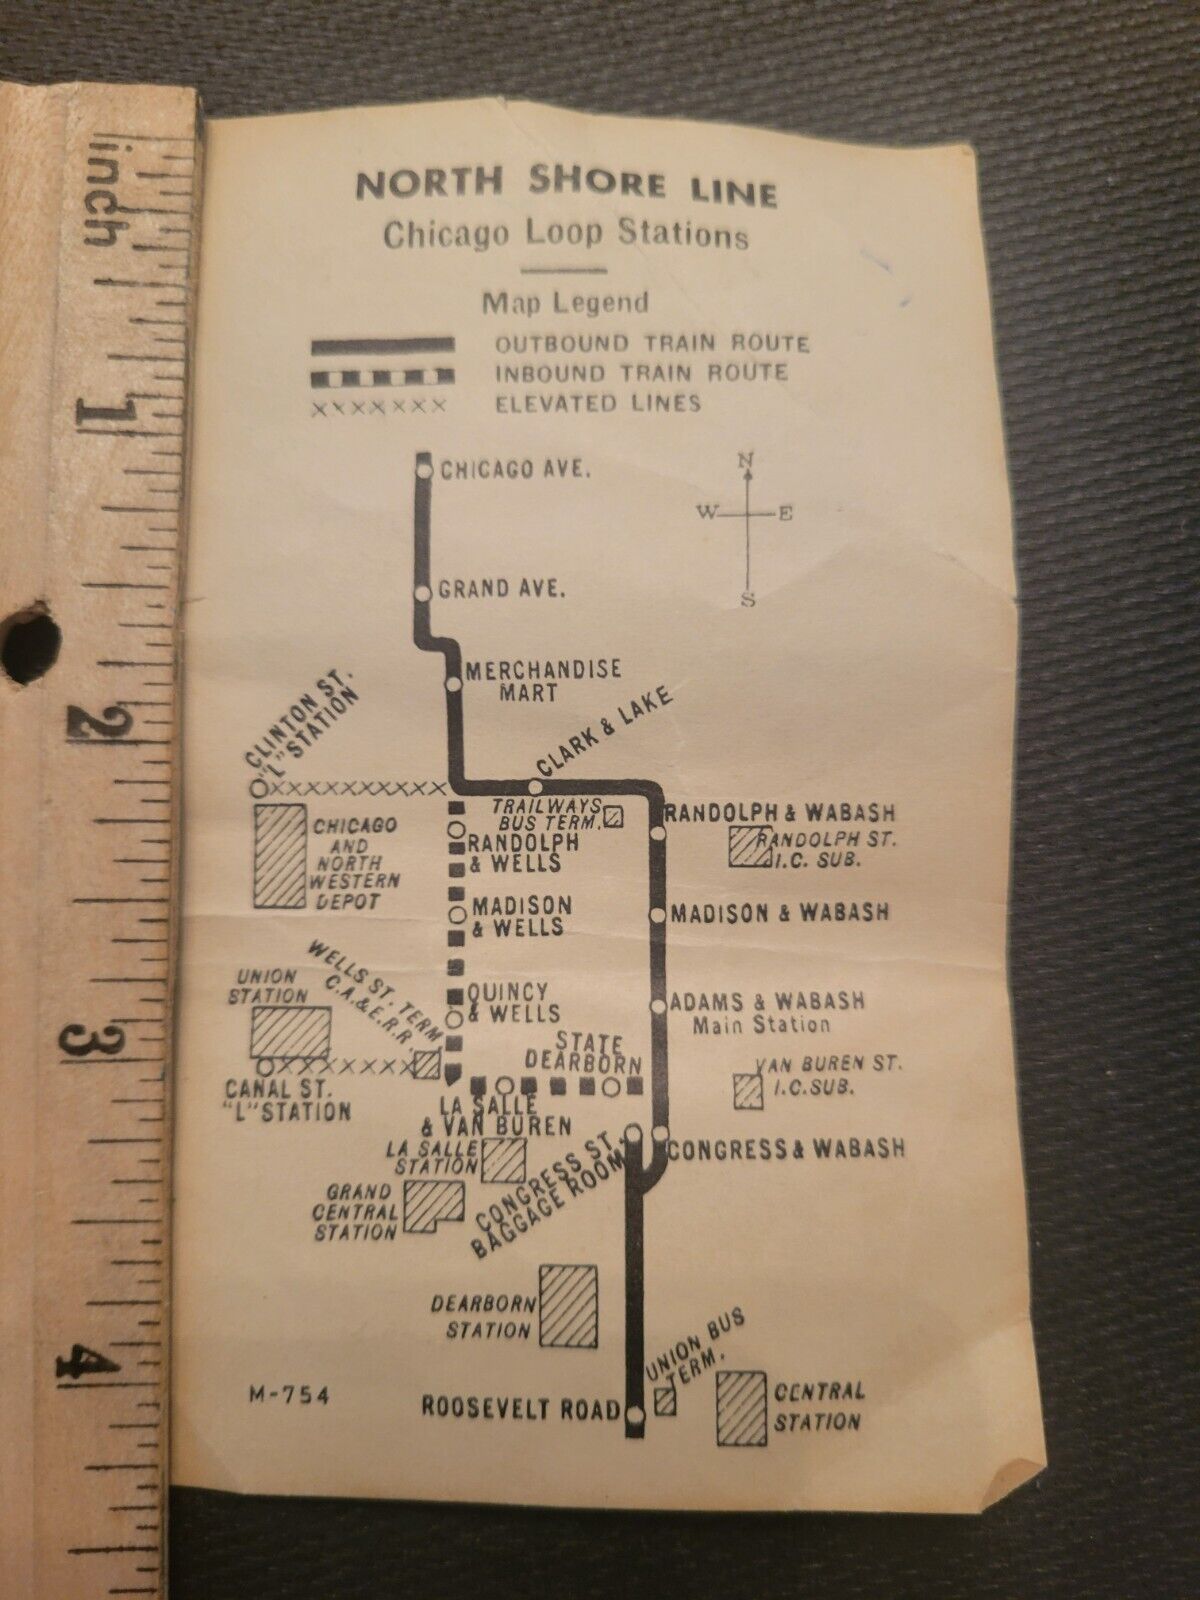 North Shore Line - Chicago Loop Stations Map (Pocket size)